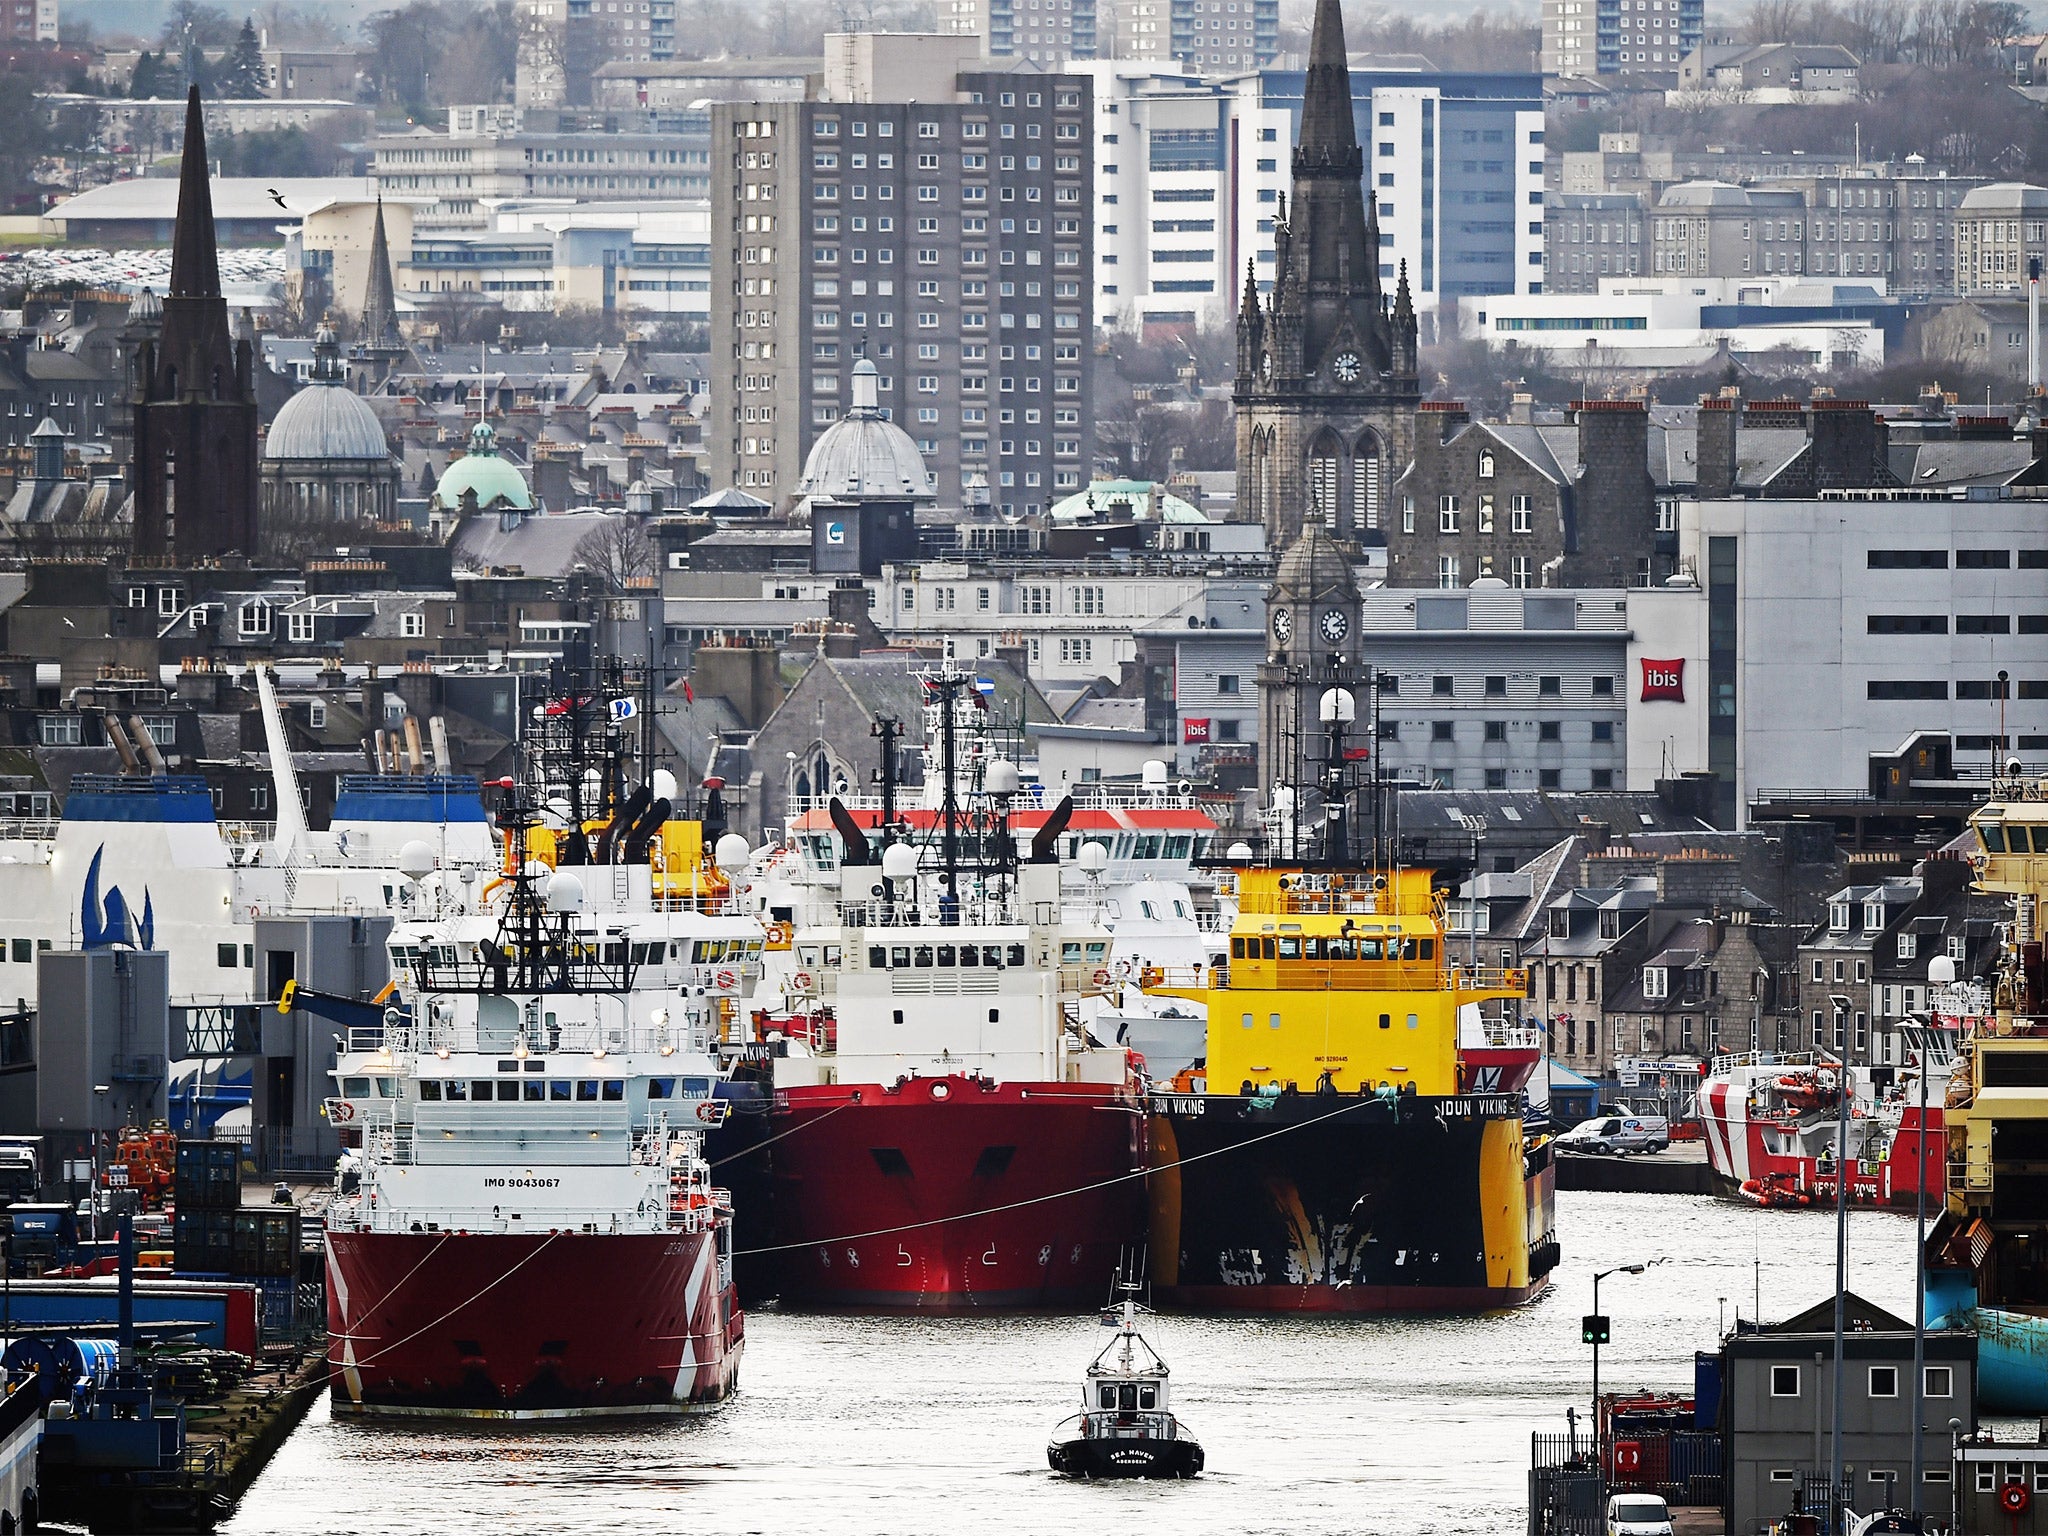 Aberdeen’s city council has expressed its concerns over the impact a declining North Sea oil industry could have on the city